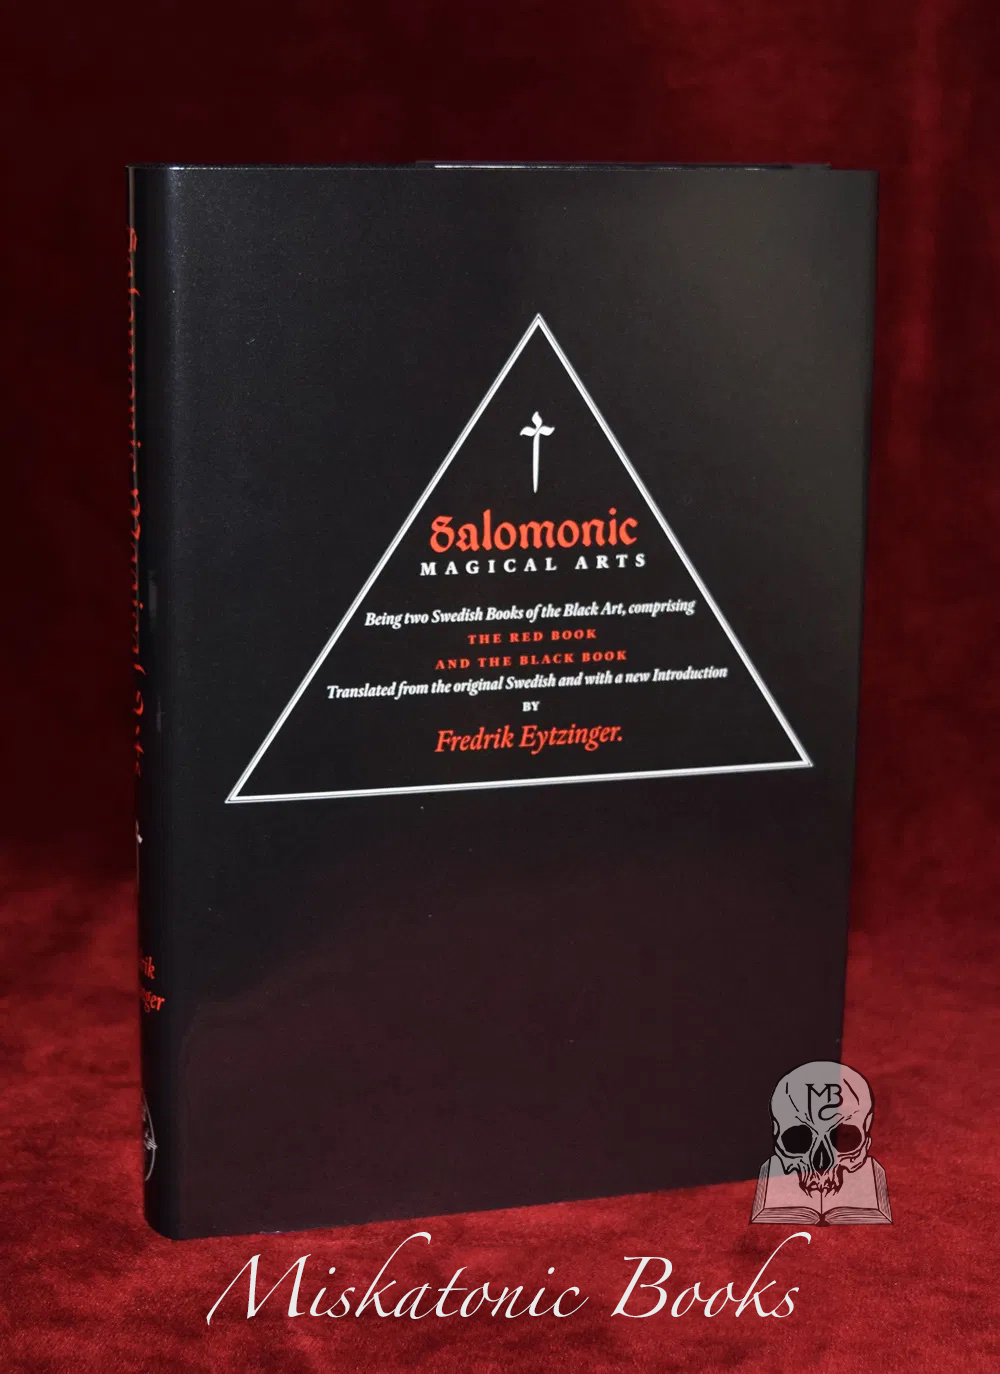 SALOMONIC MAGICAL ARTS Translated and Introduced by Fredrik Eytzinger - Limited Edition Hardcover